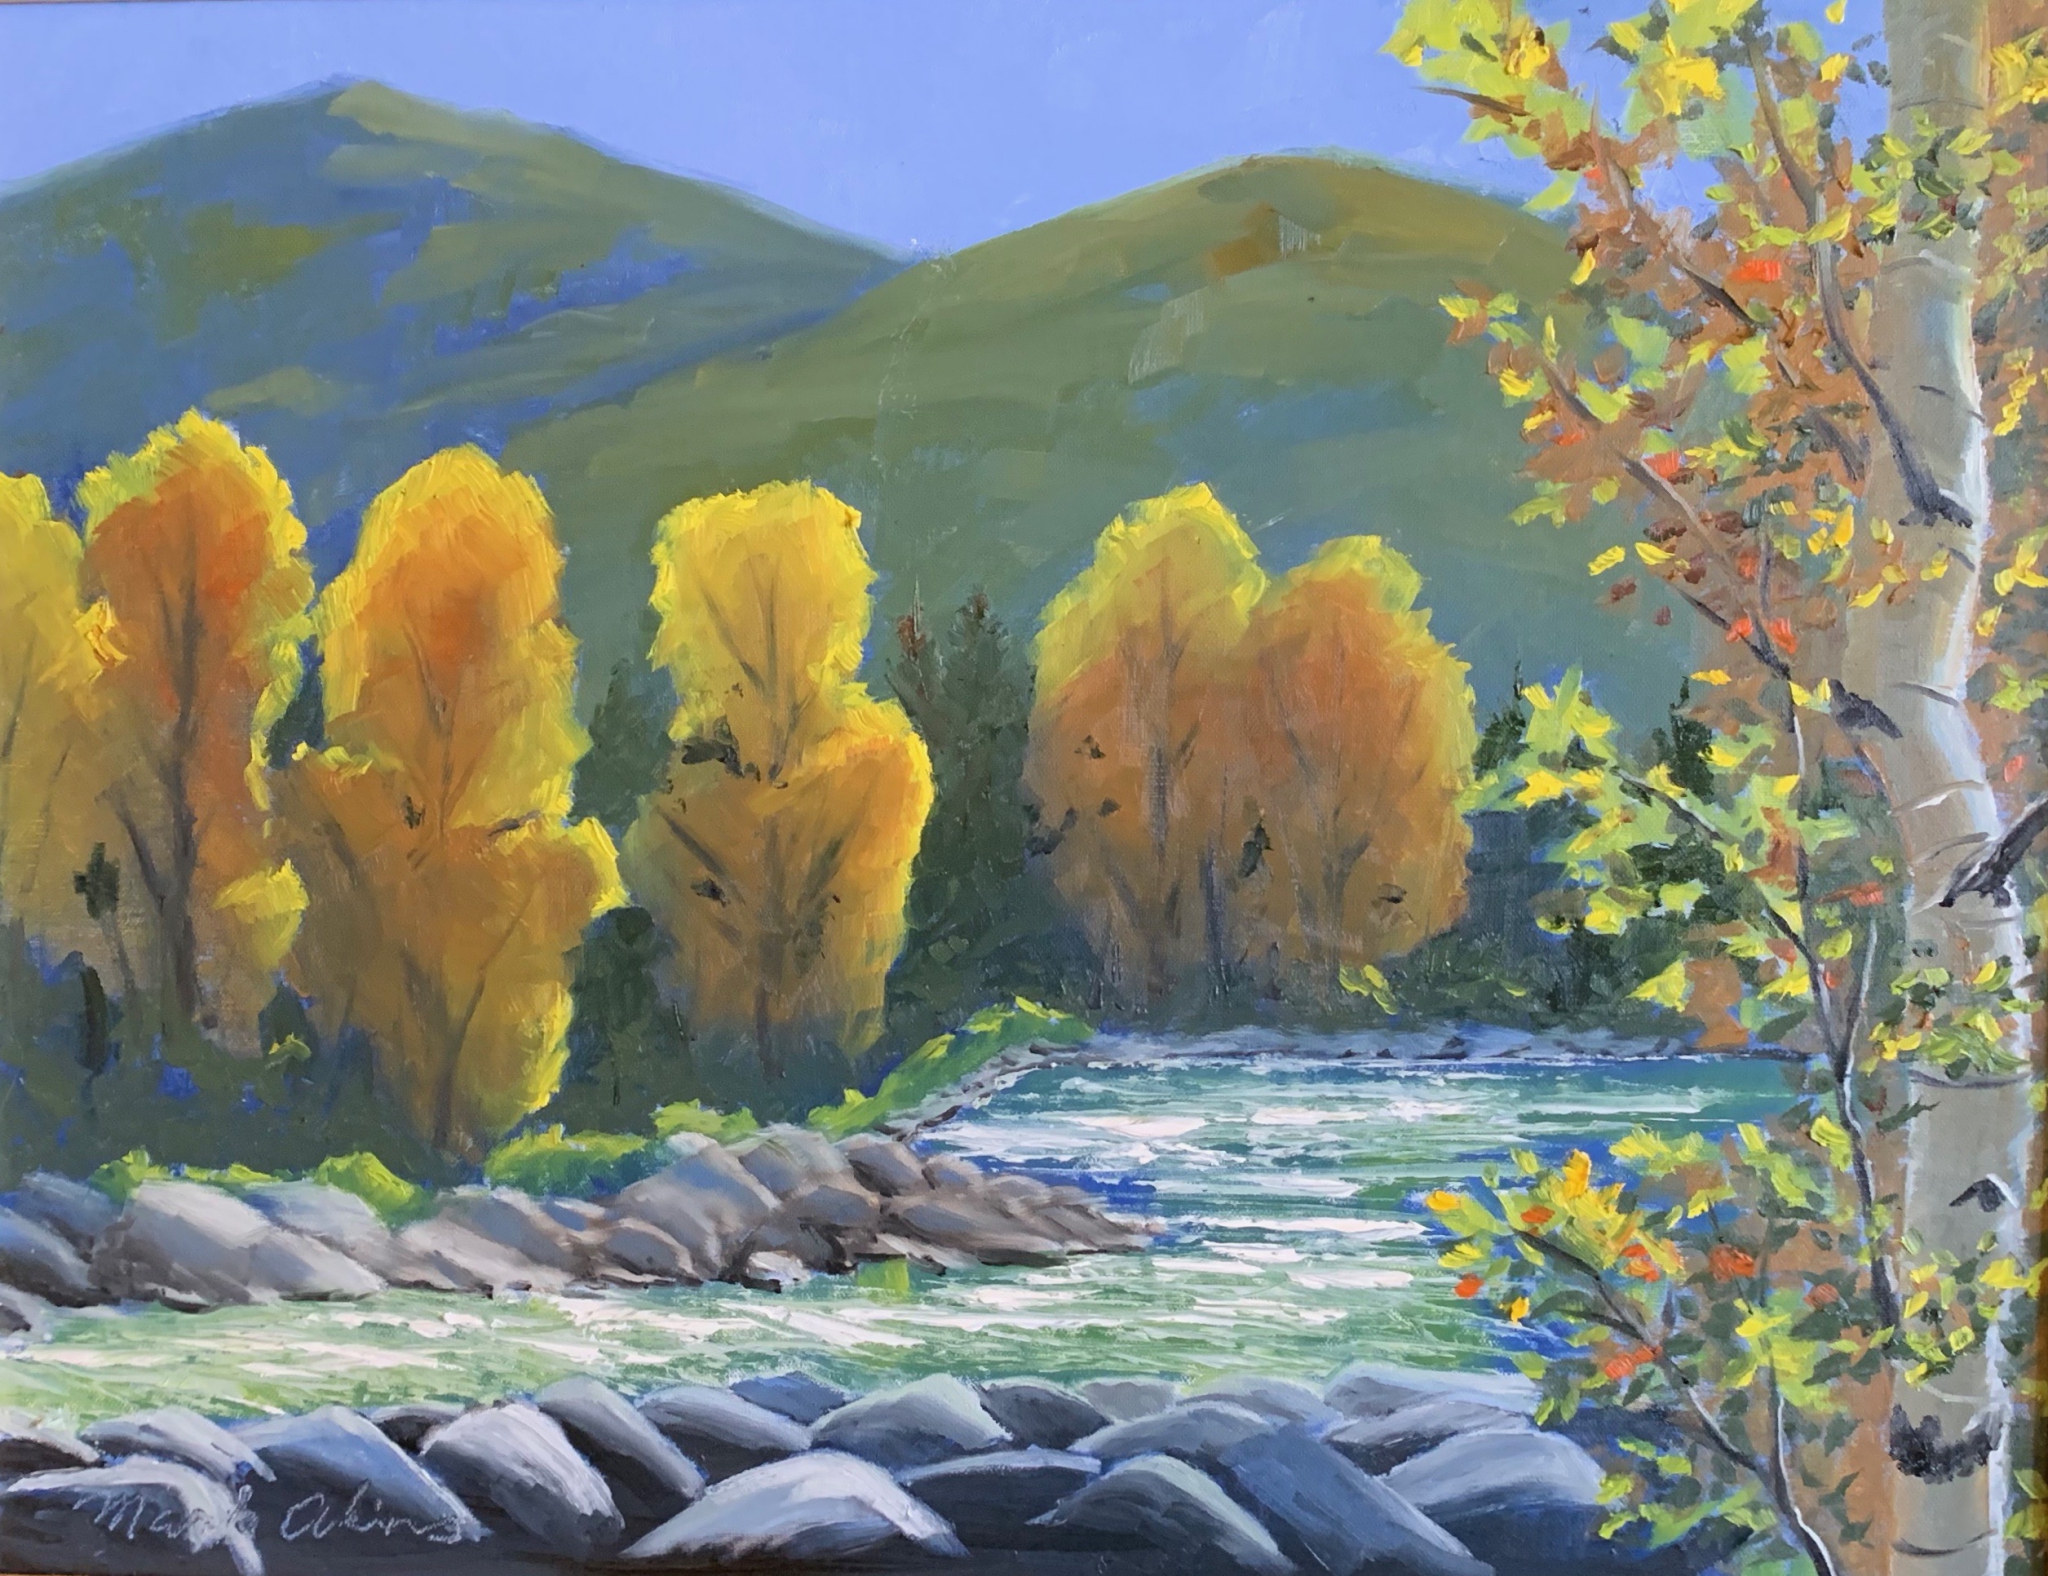 Click here to view Morning on the Elk River by The Painter